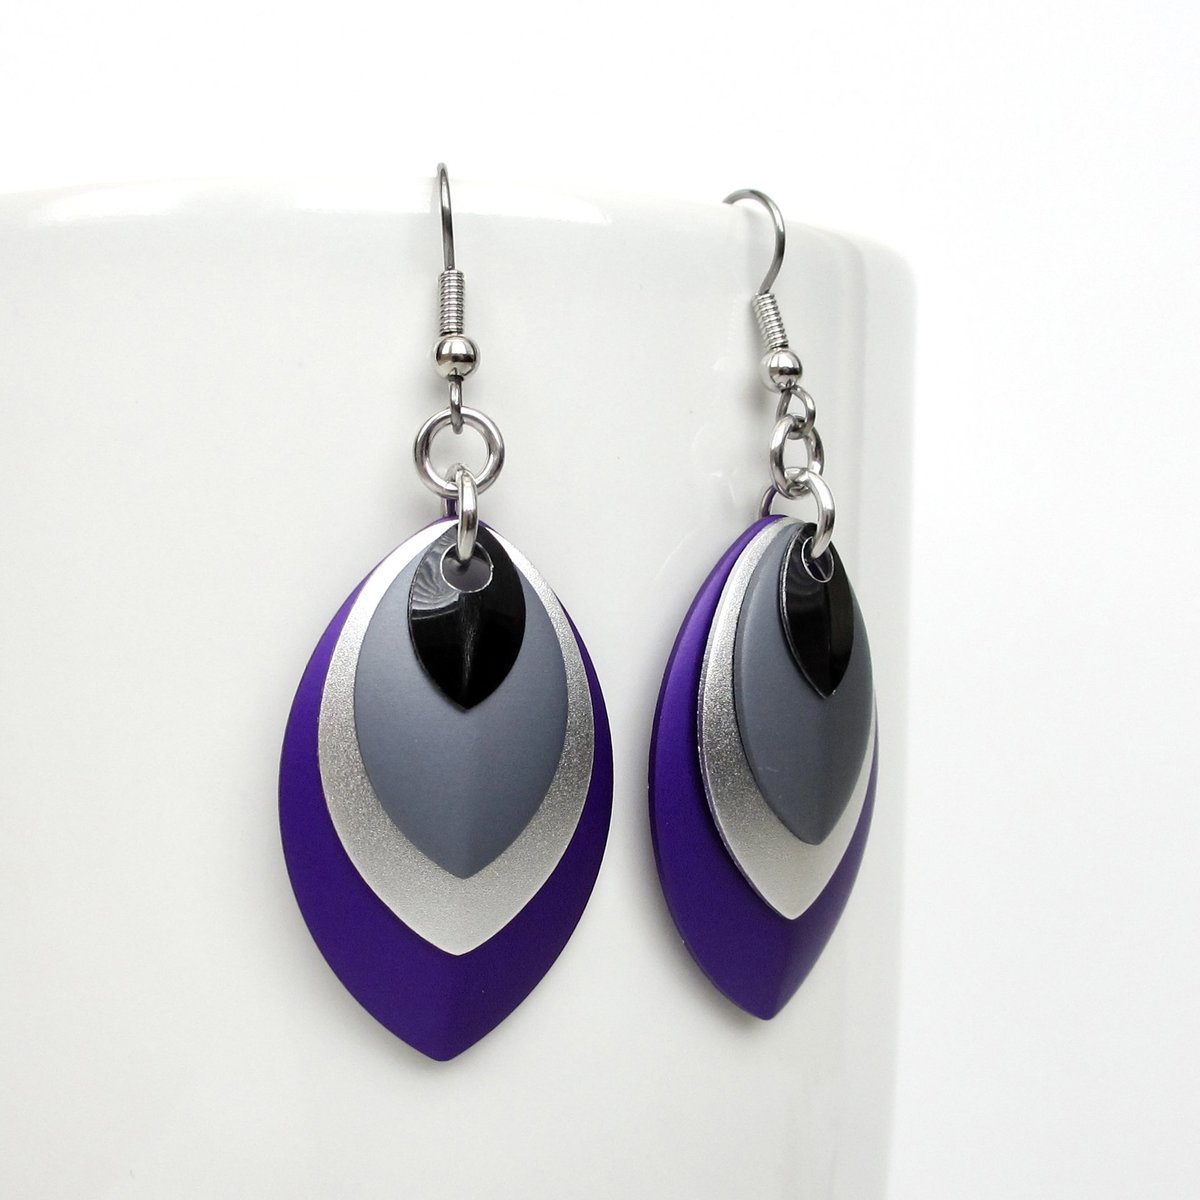 Asexual pride earrings, chainmail scales ace jewelry; black gray white purple